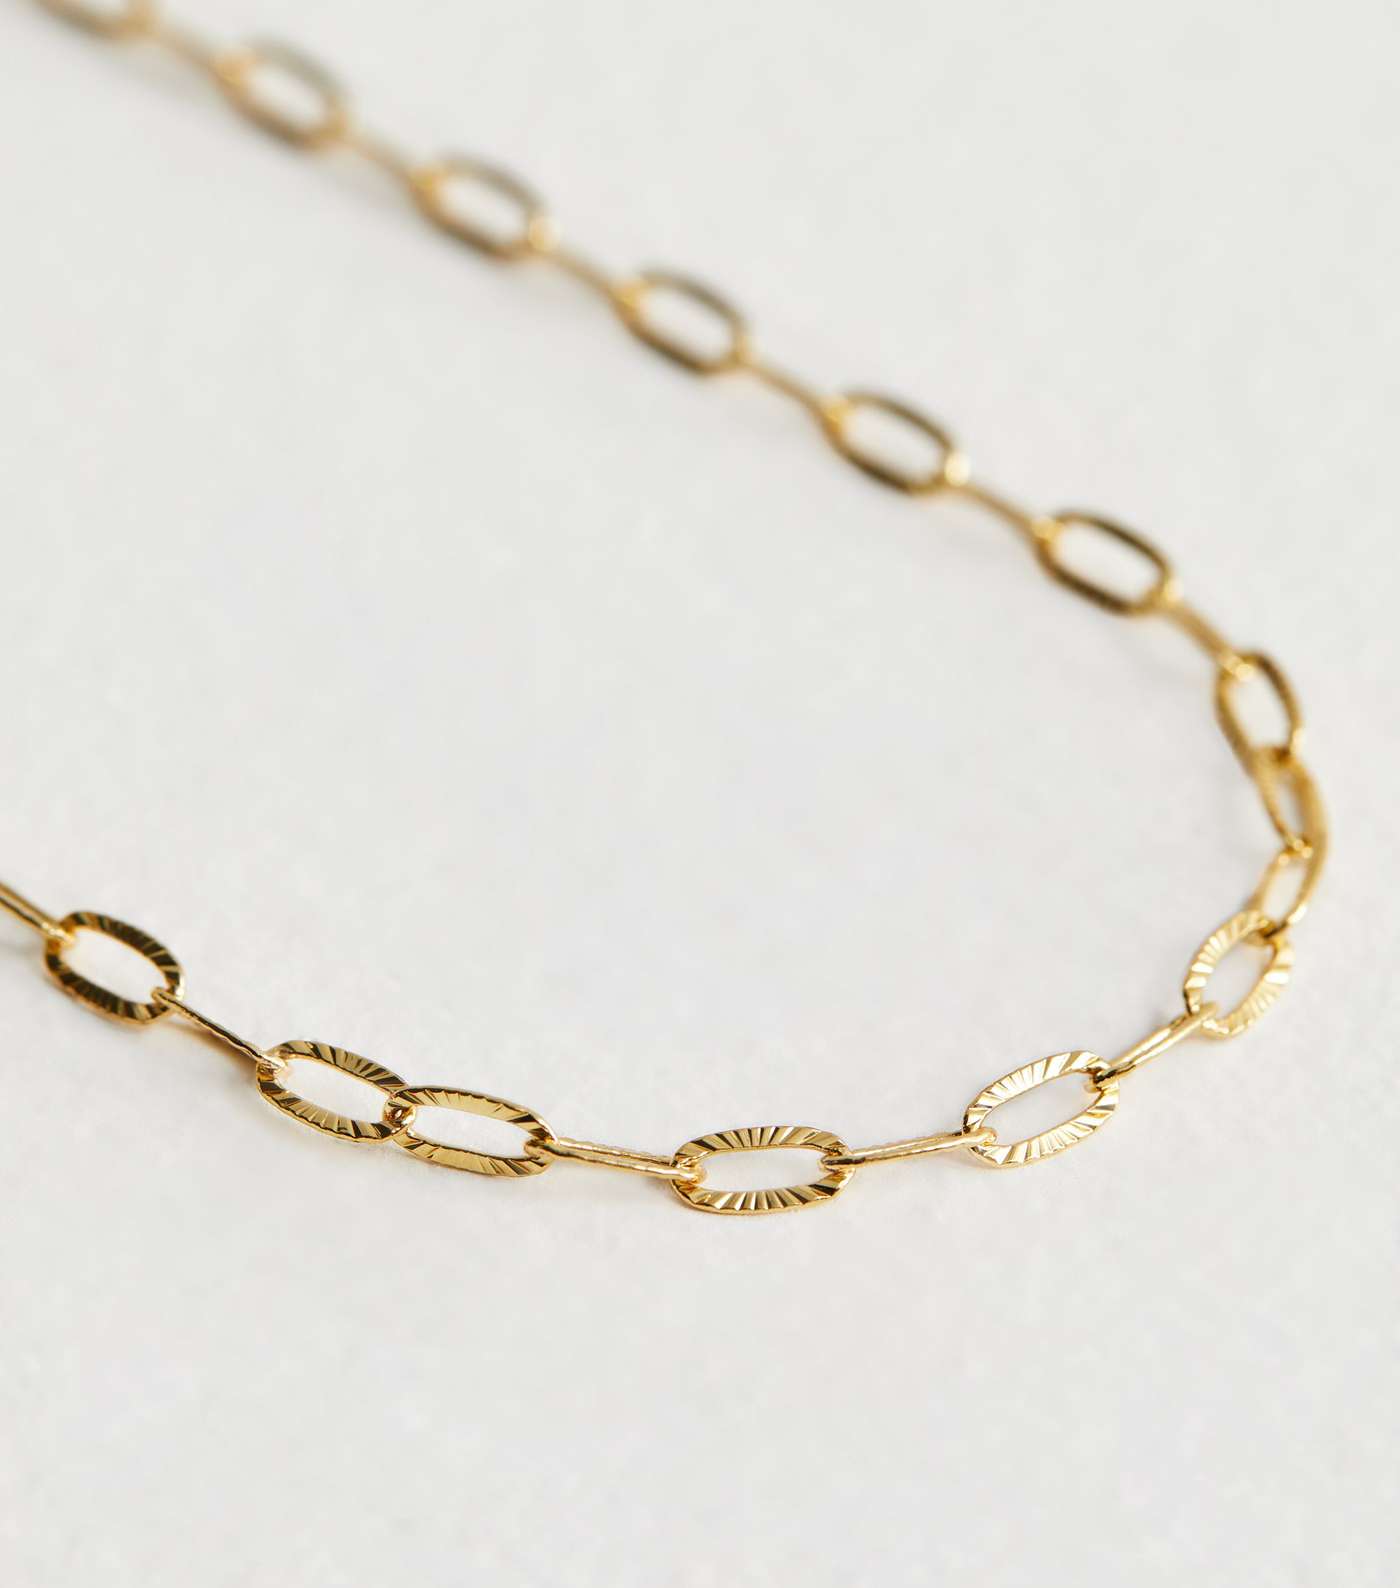 Real Gold Plate Textured Chain Necklace Image 4